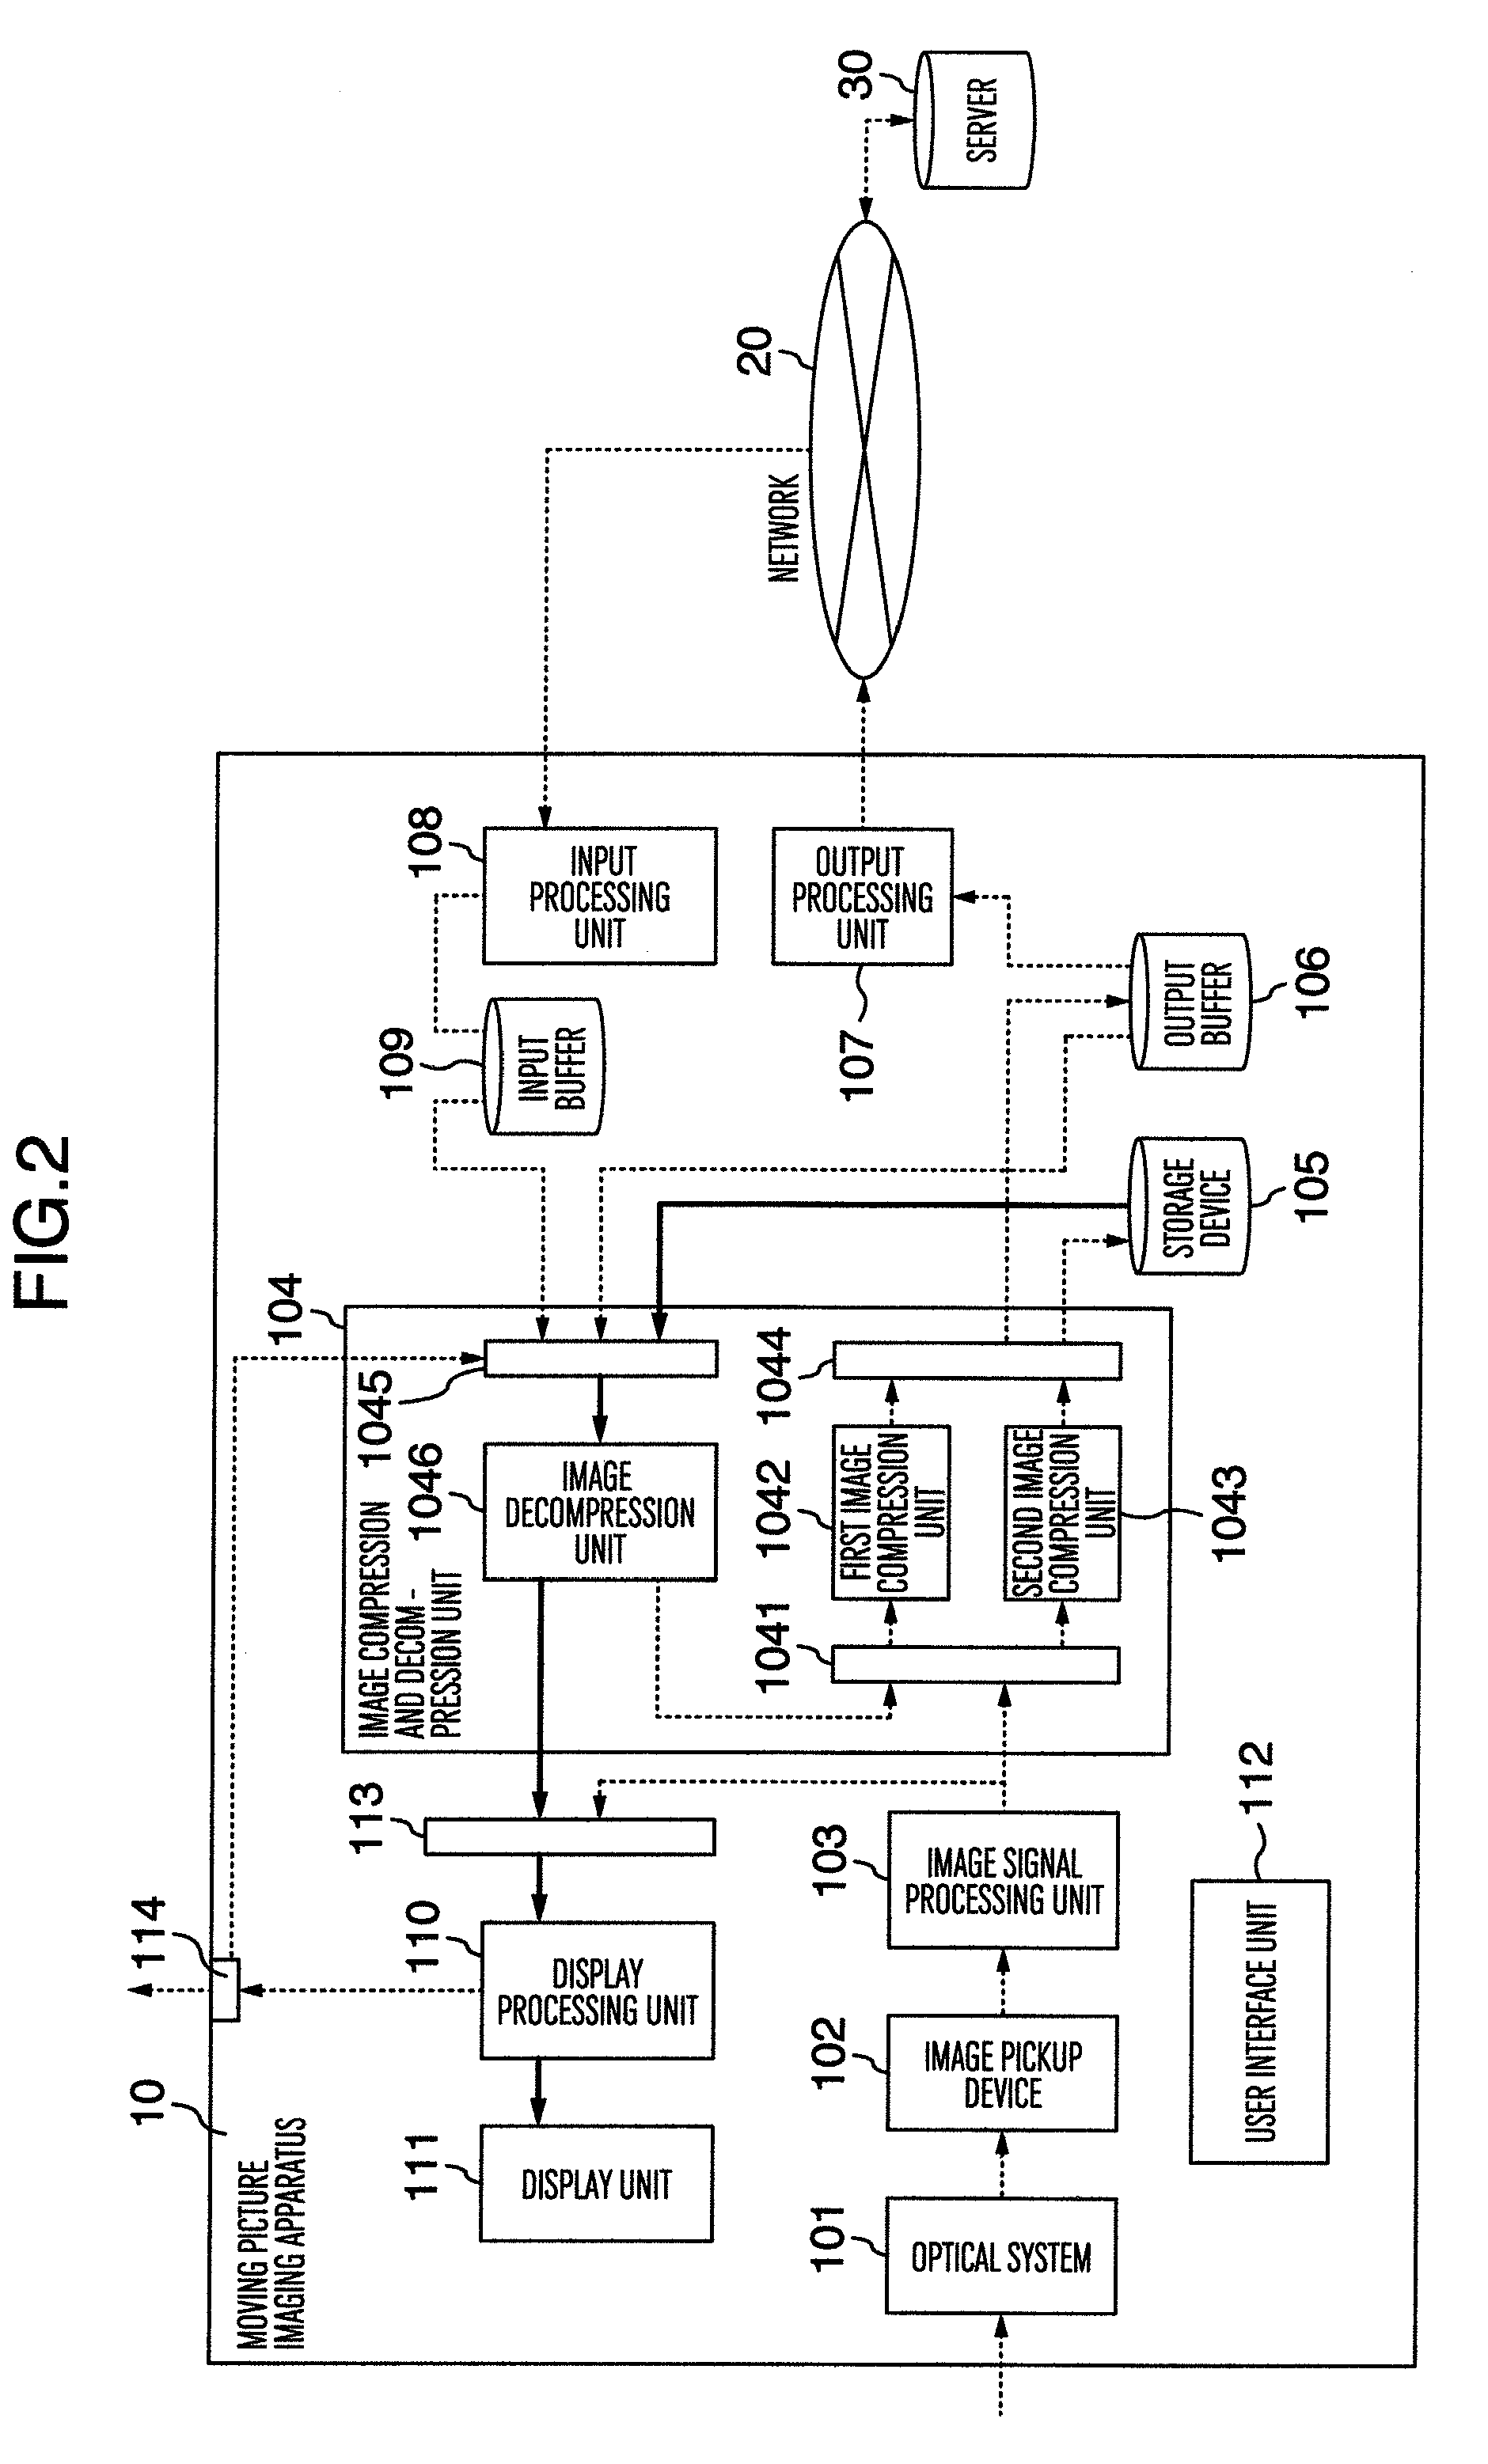 Video Recording System and Imaging Apparatus